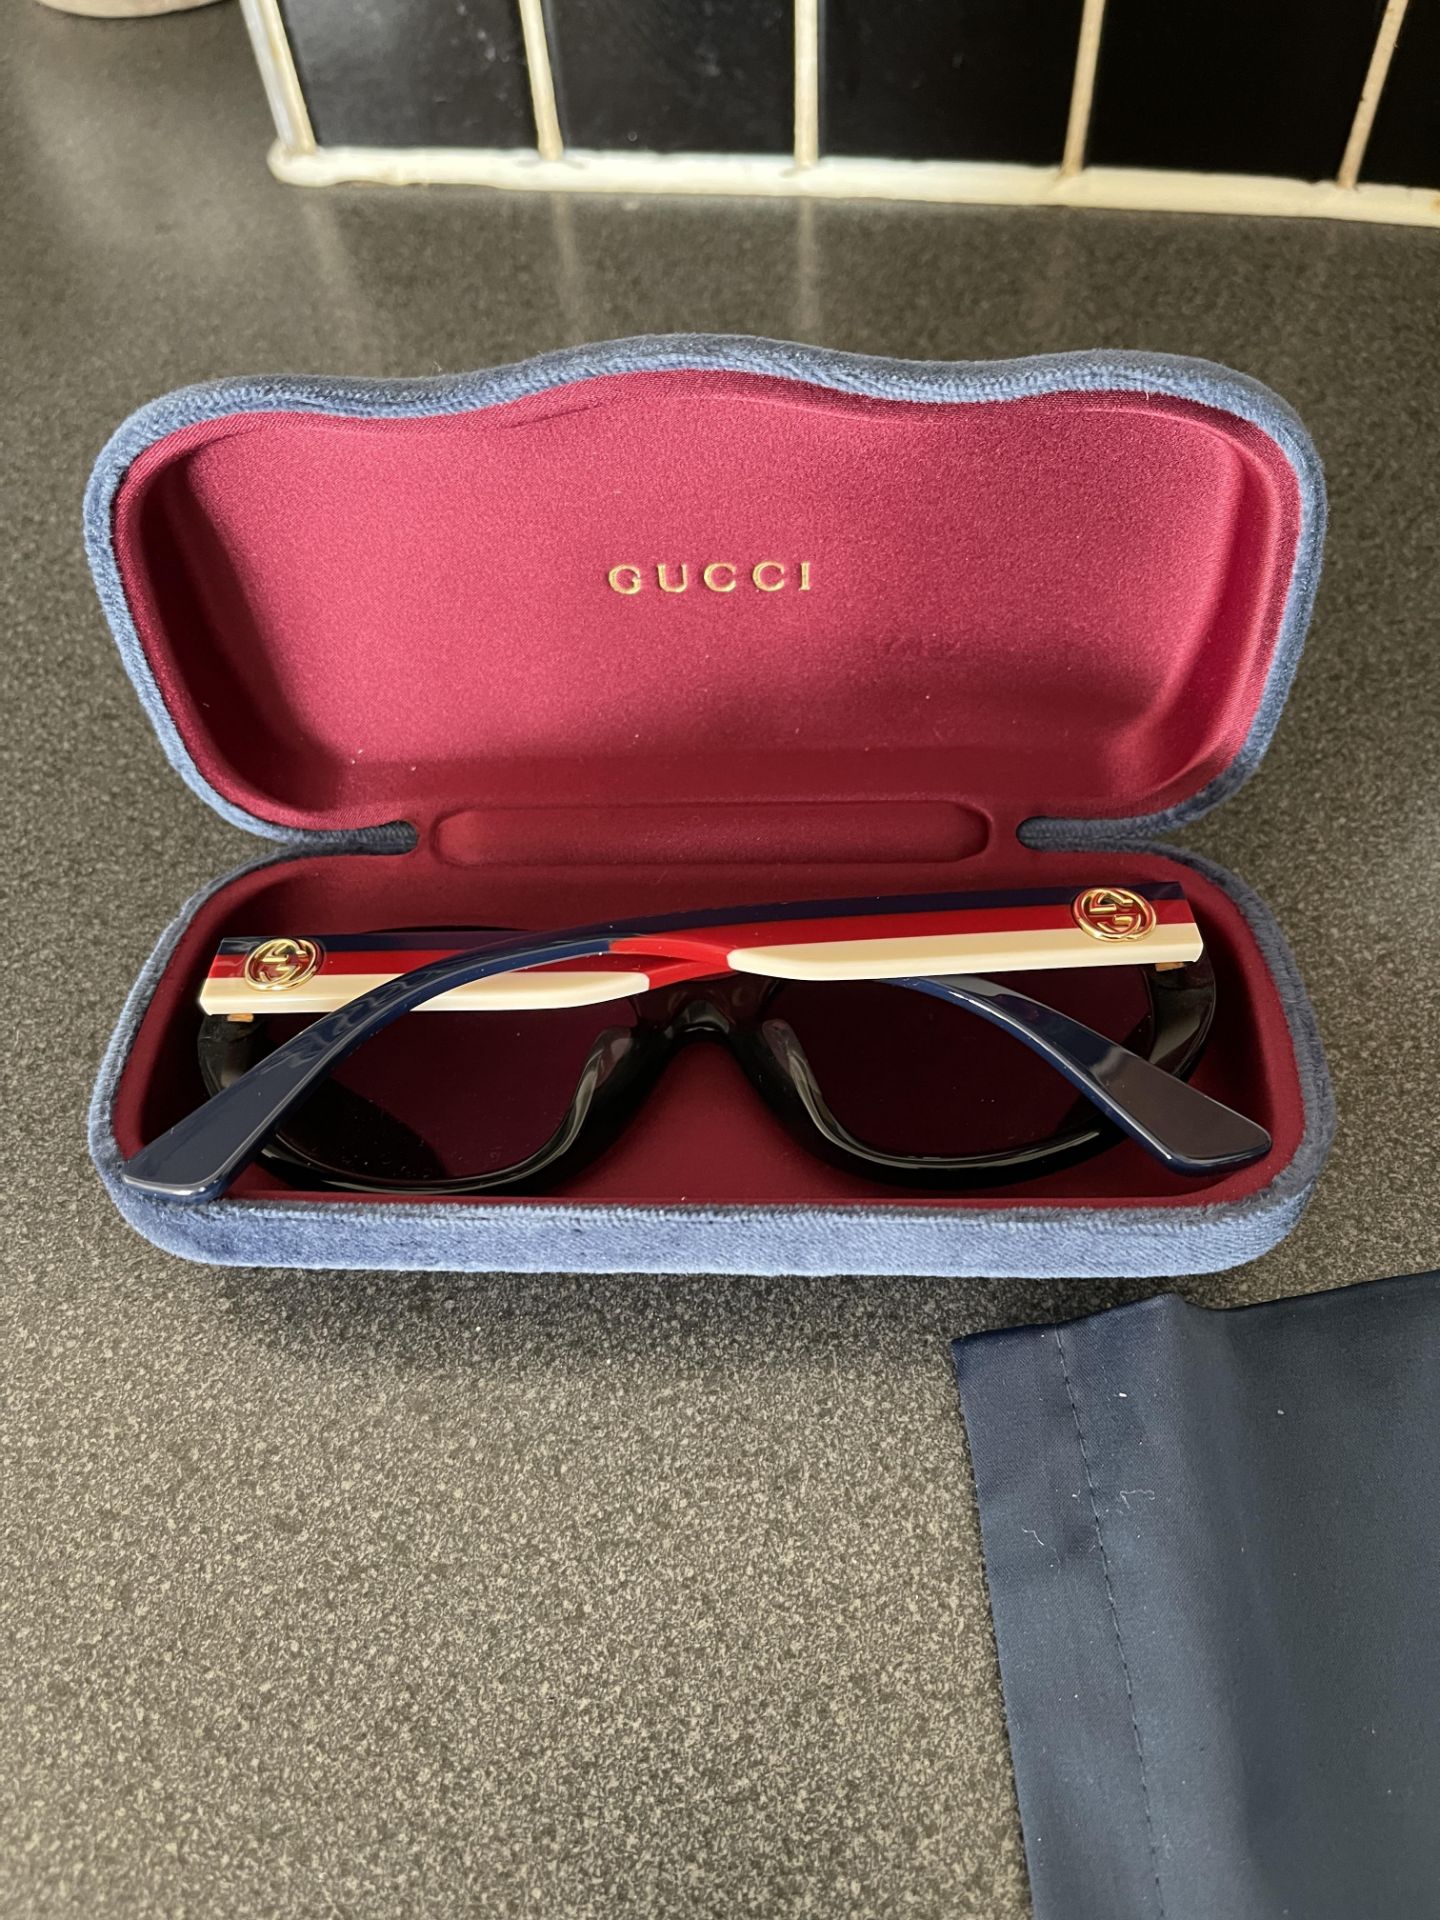 Gucci ladies sunglasses demon from a private jet charter. with case and cloth - Image 8 of 9